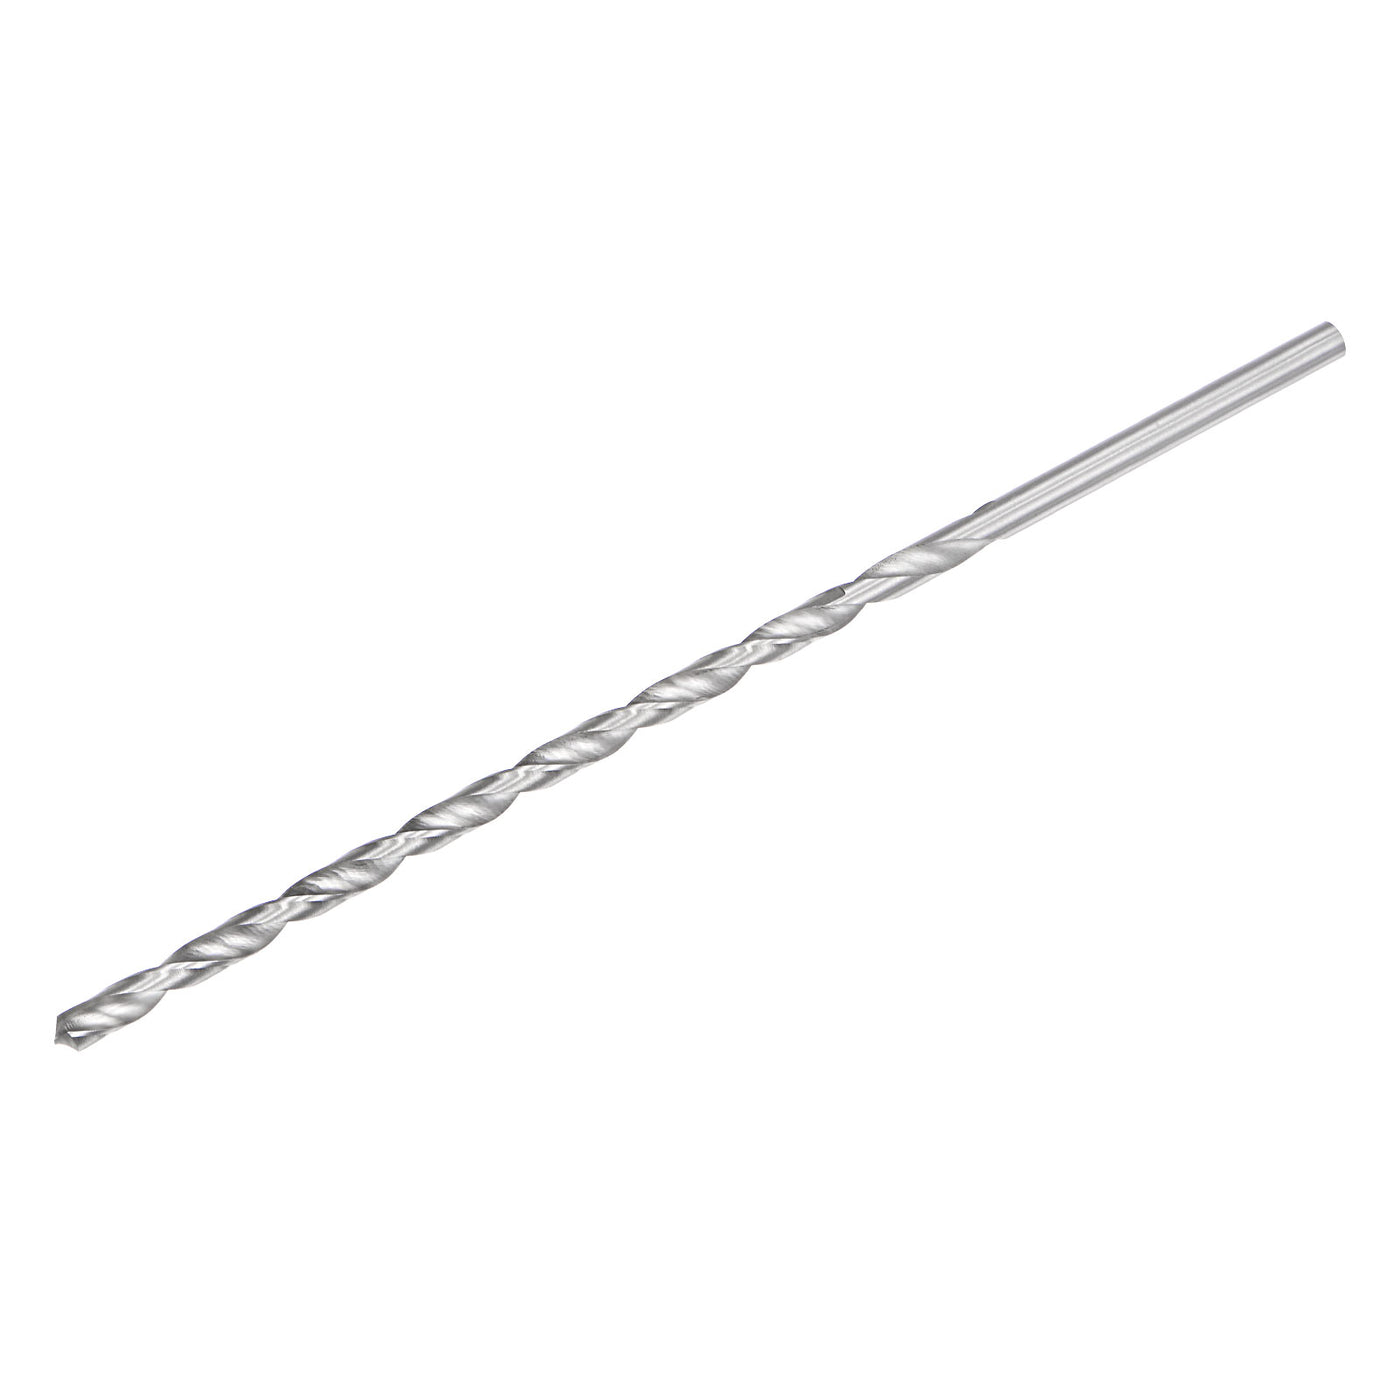 uxcell Uxcell 7mm Twist Drill Bits, High-Speed Steel Extra Long Drill Bit 250mm Length